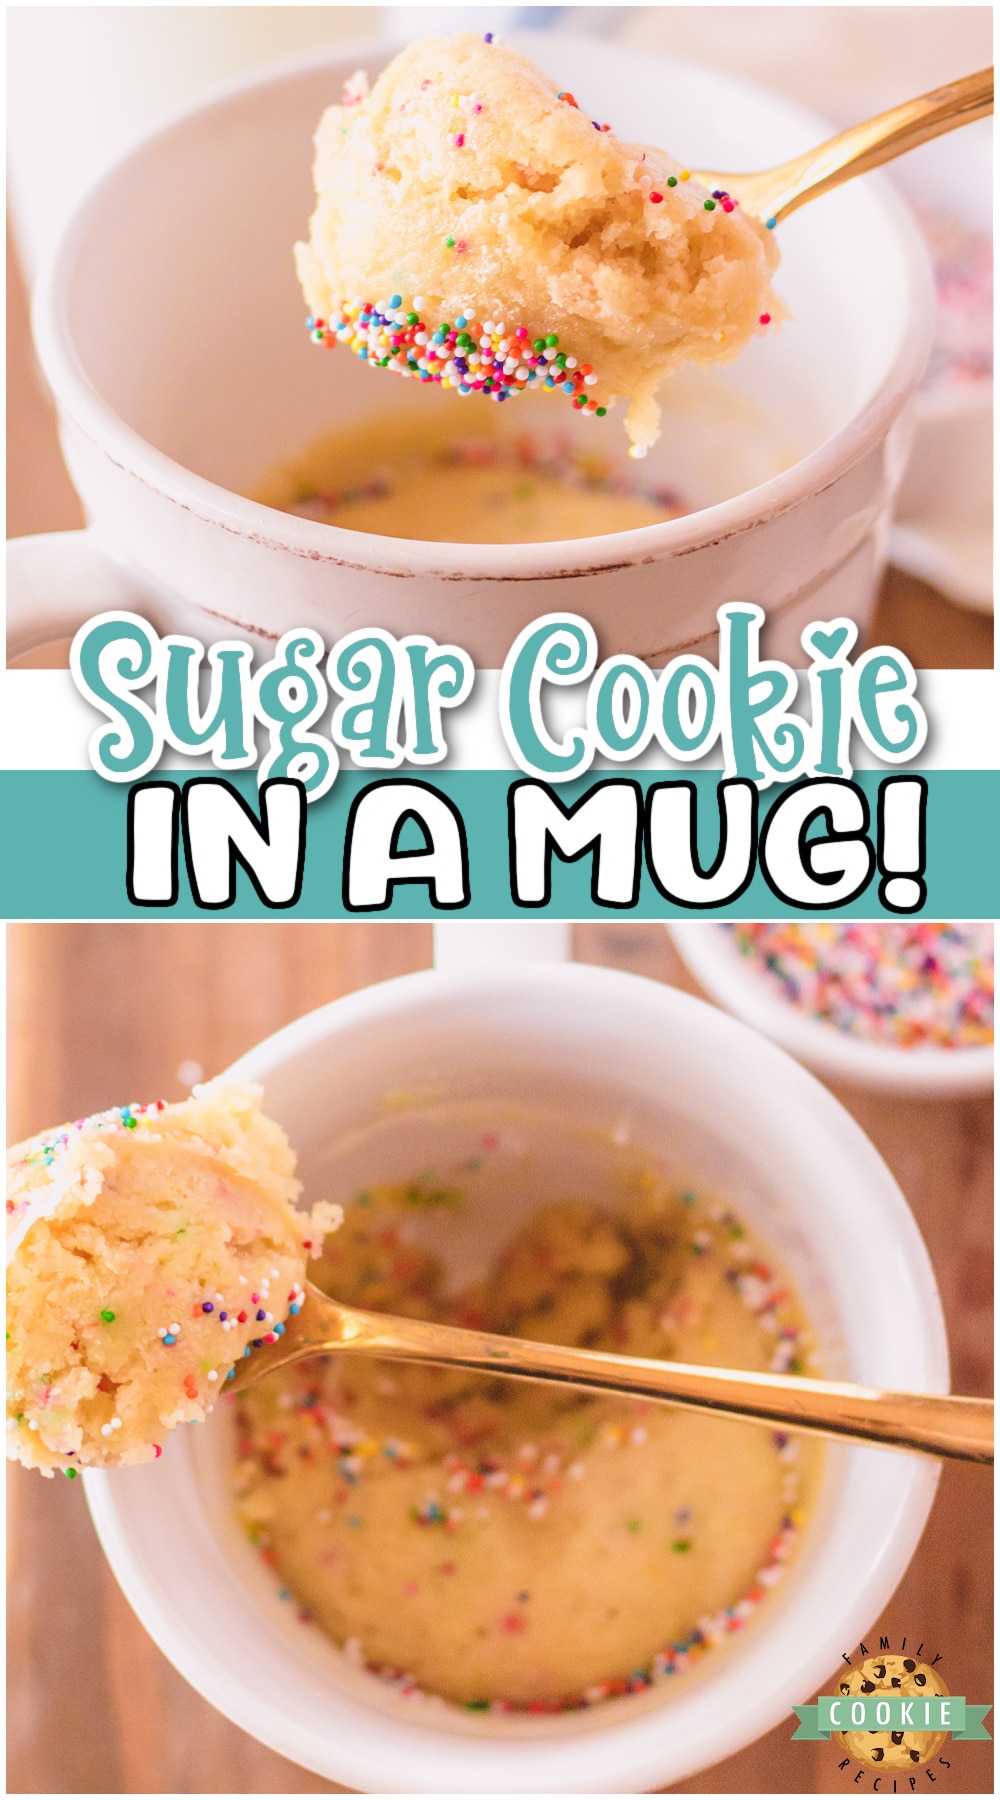 Sugar Cookie In a MUG recipe for when you just want a cookie, fast! Quick & easy warm sugar cookie done in minutes & made in a mug in the microwave! via @buttergirls